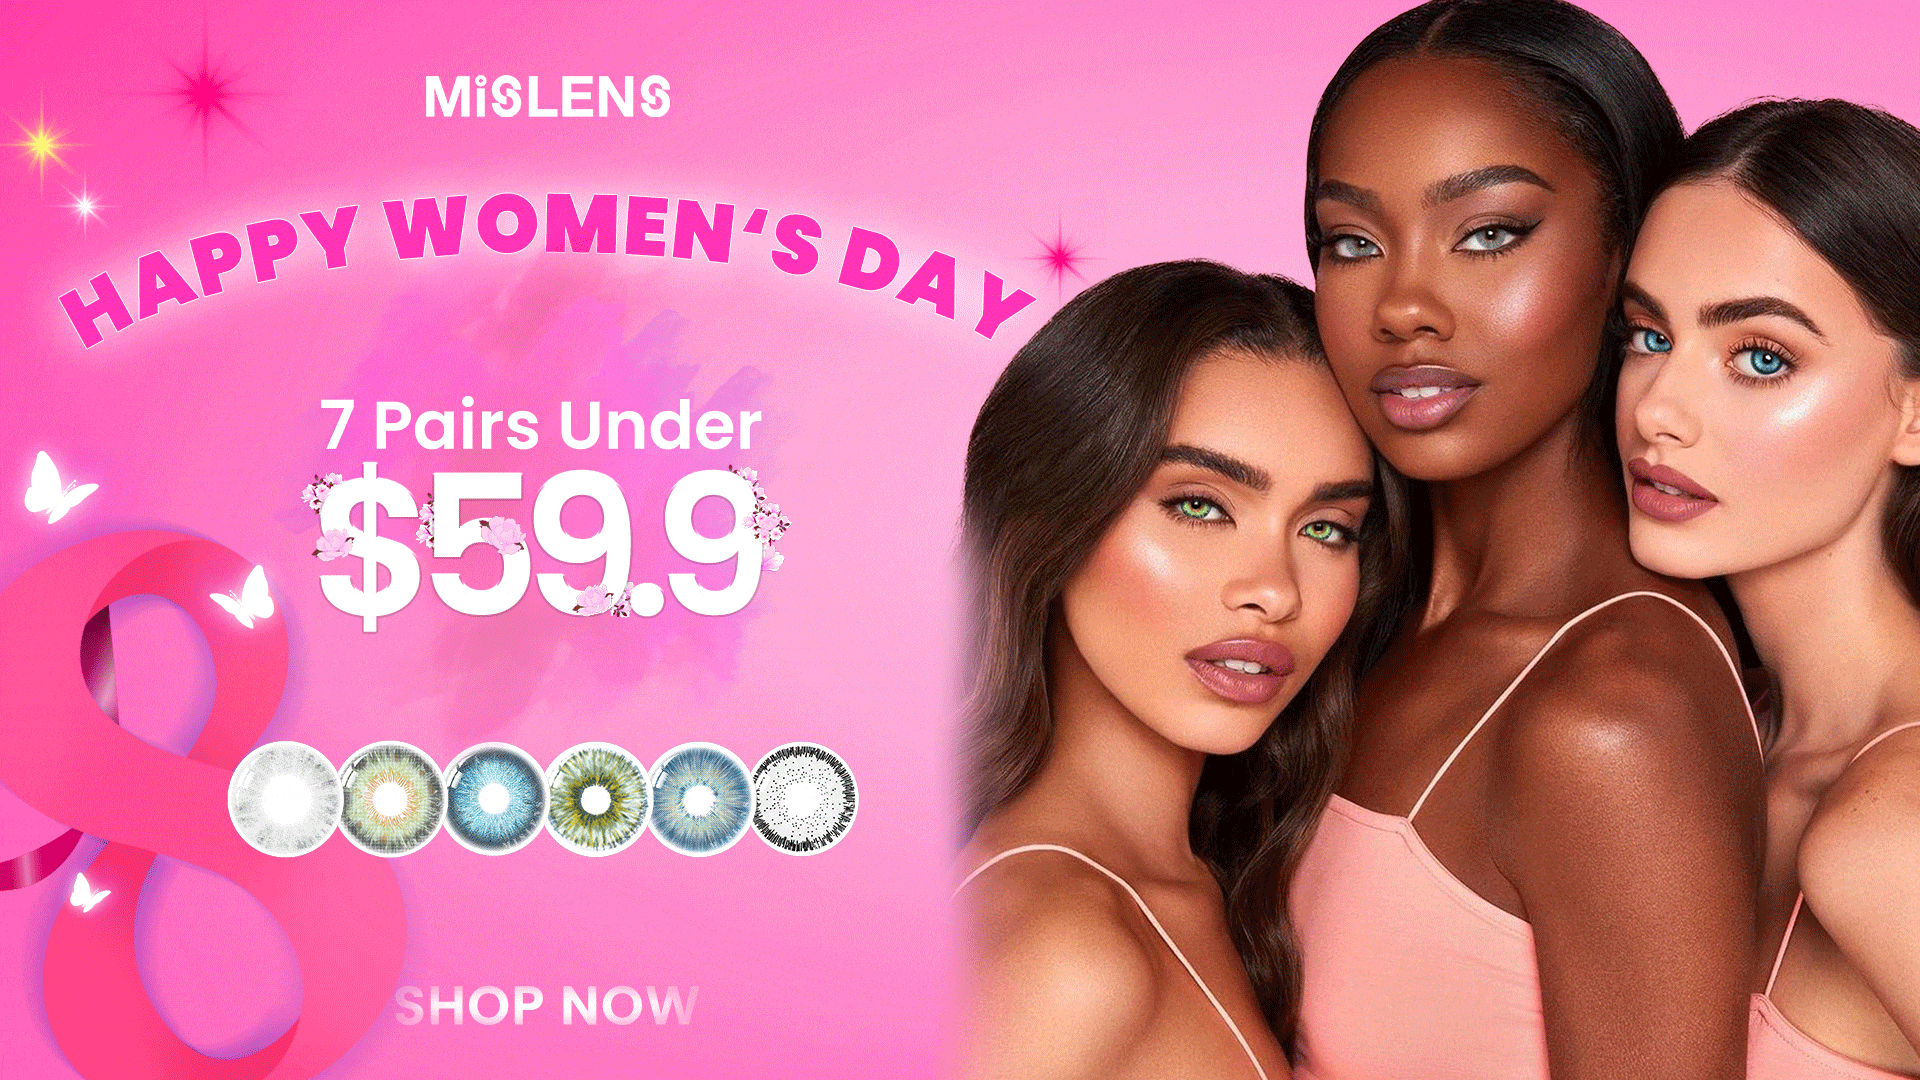 Mislens Contacts women's day Deals banner 